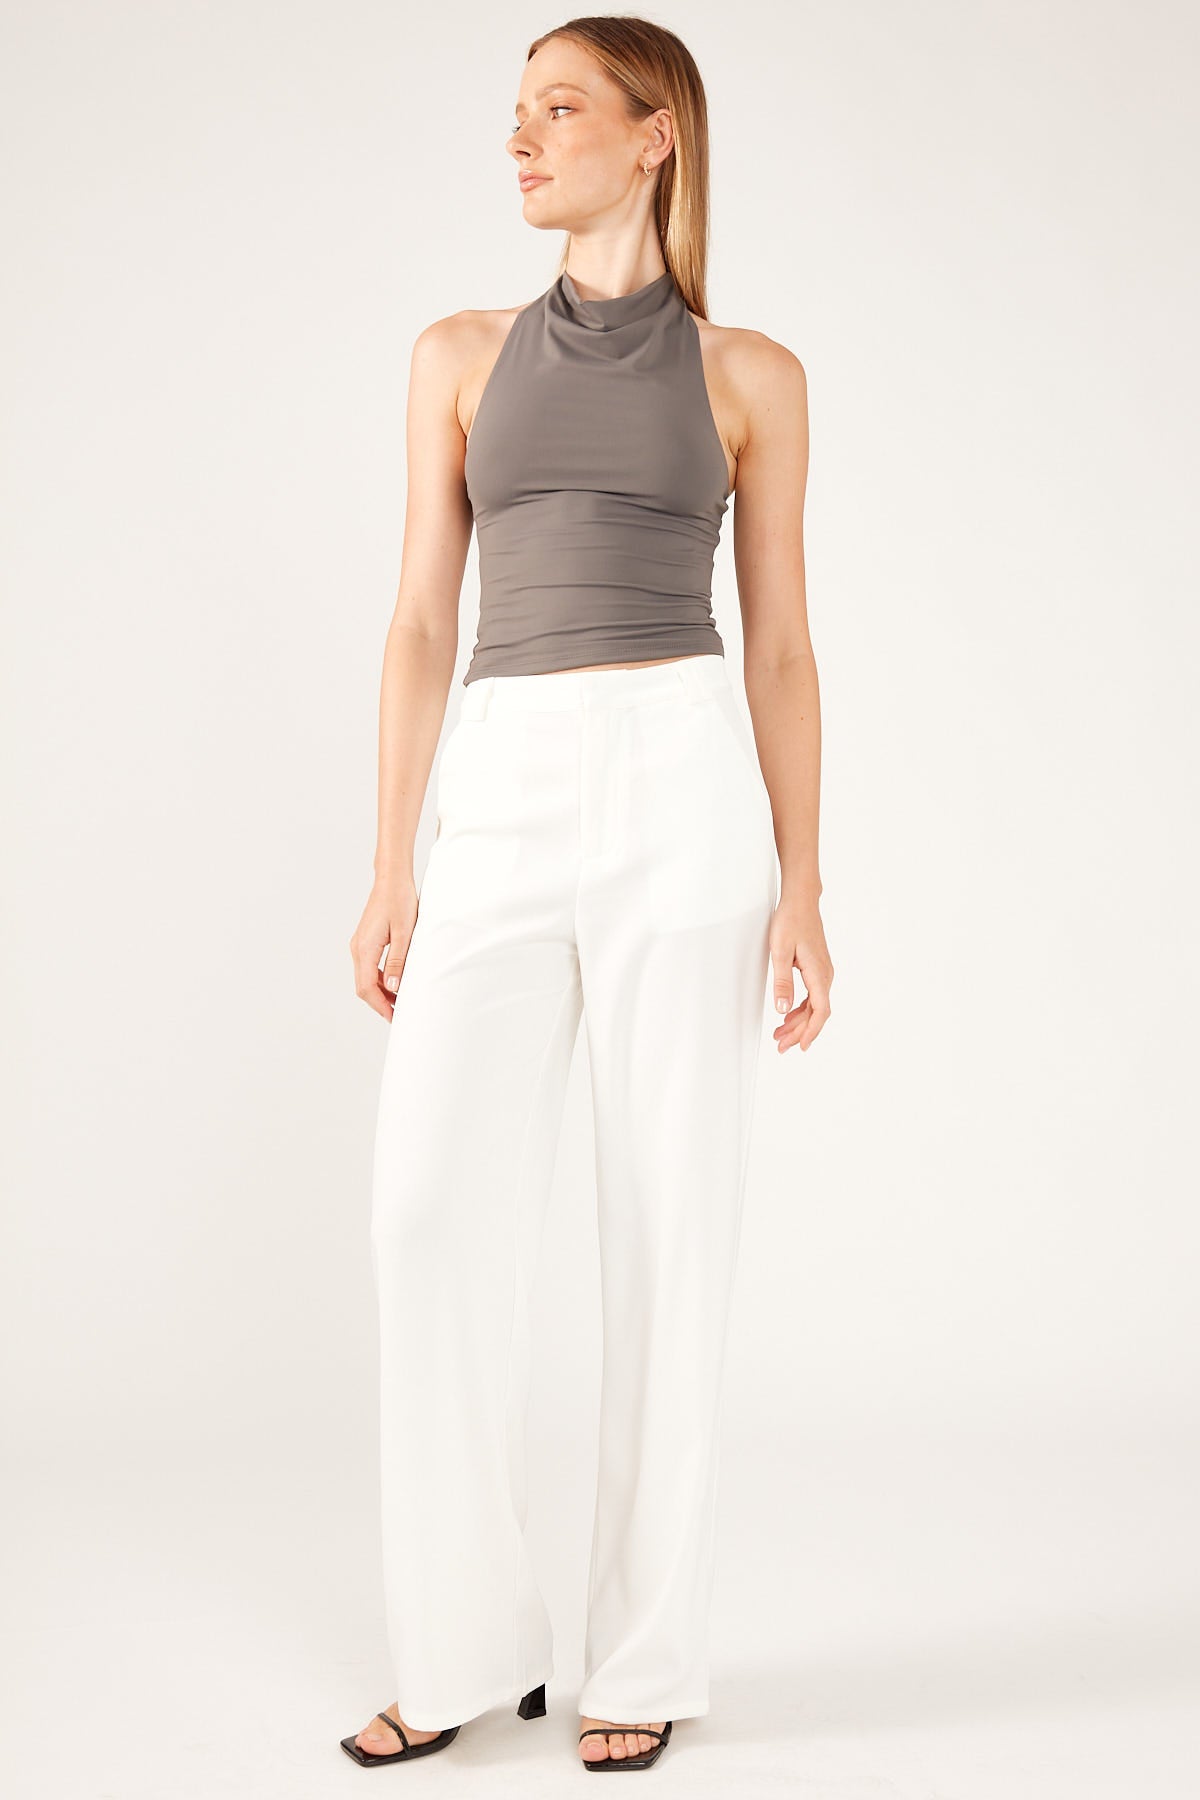 Women's White Pants & Trousers  Casual and Tailored Styles